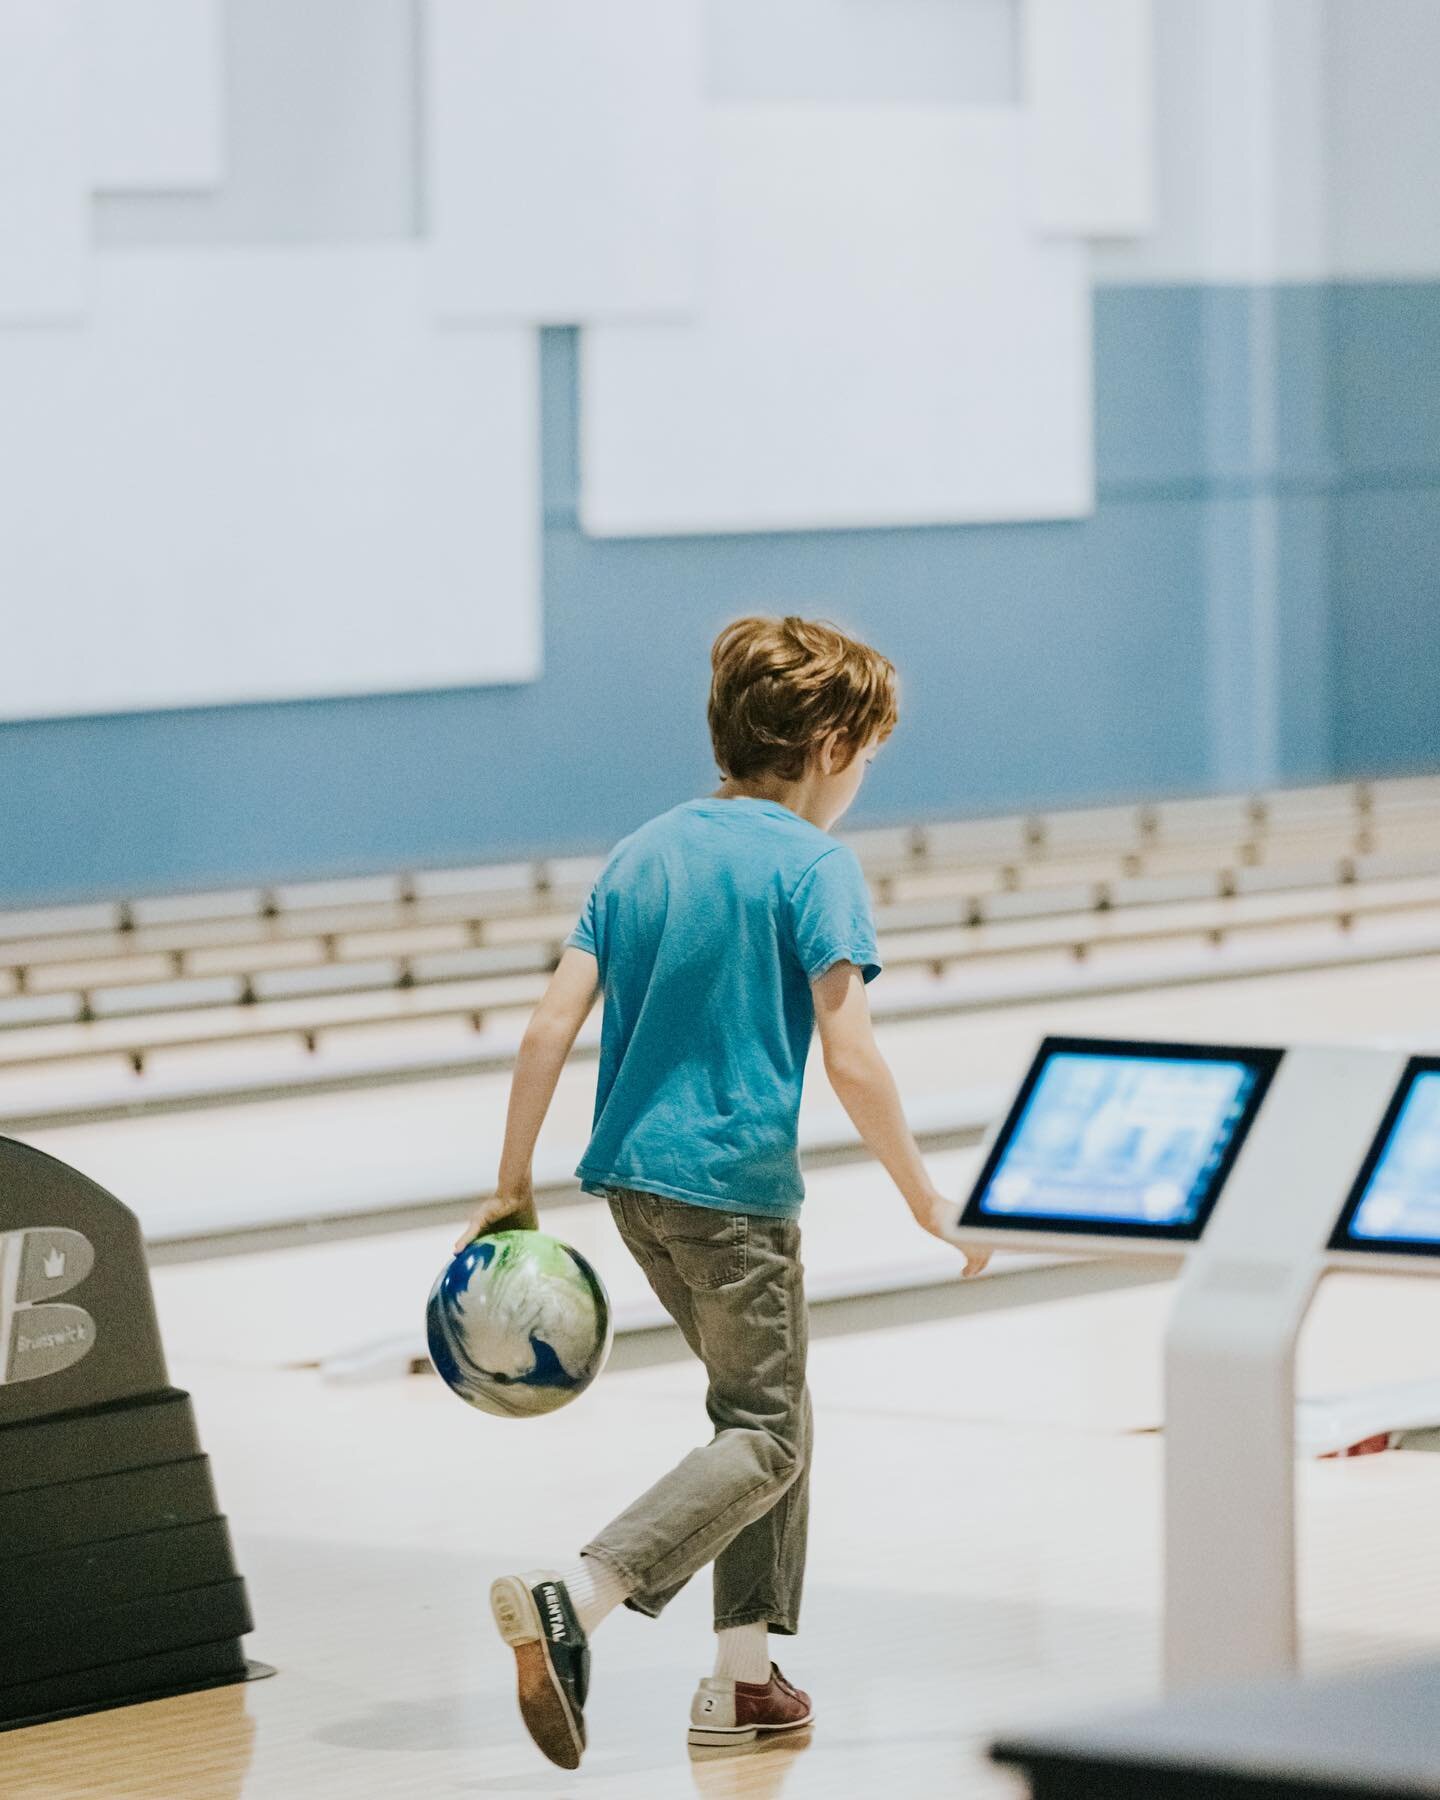 We Like The Way You Roll 🎳 🤩

Tag us in your photos for a chance to be featured! #westseattlebowl #feature